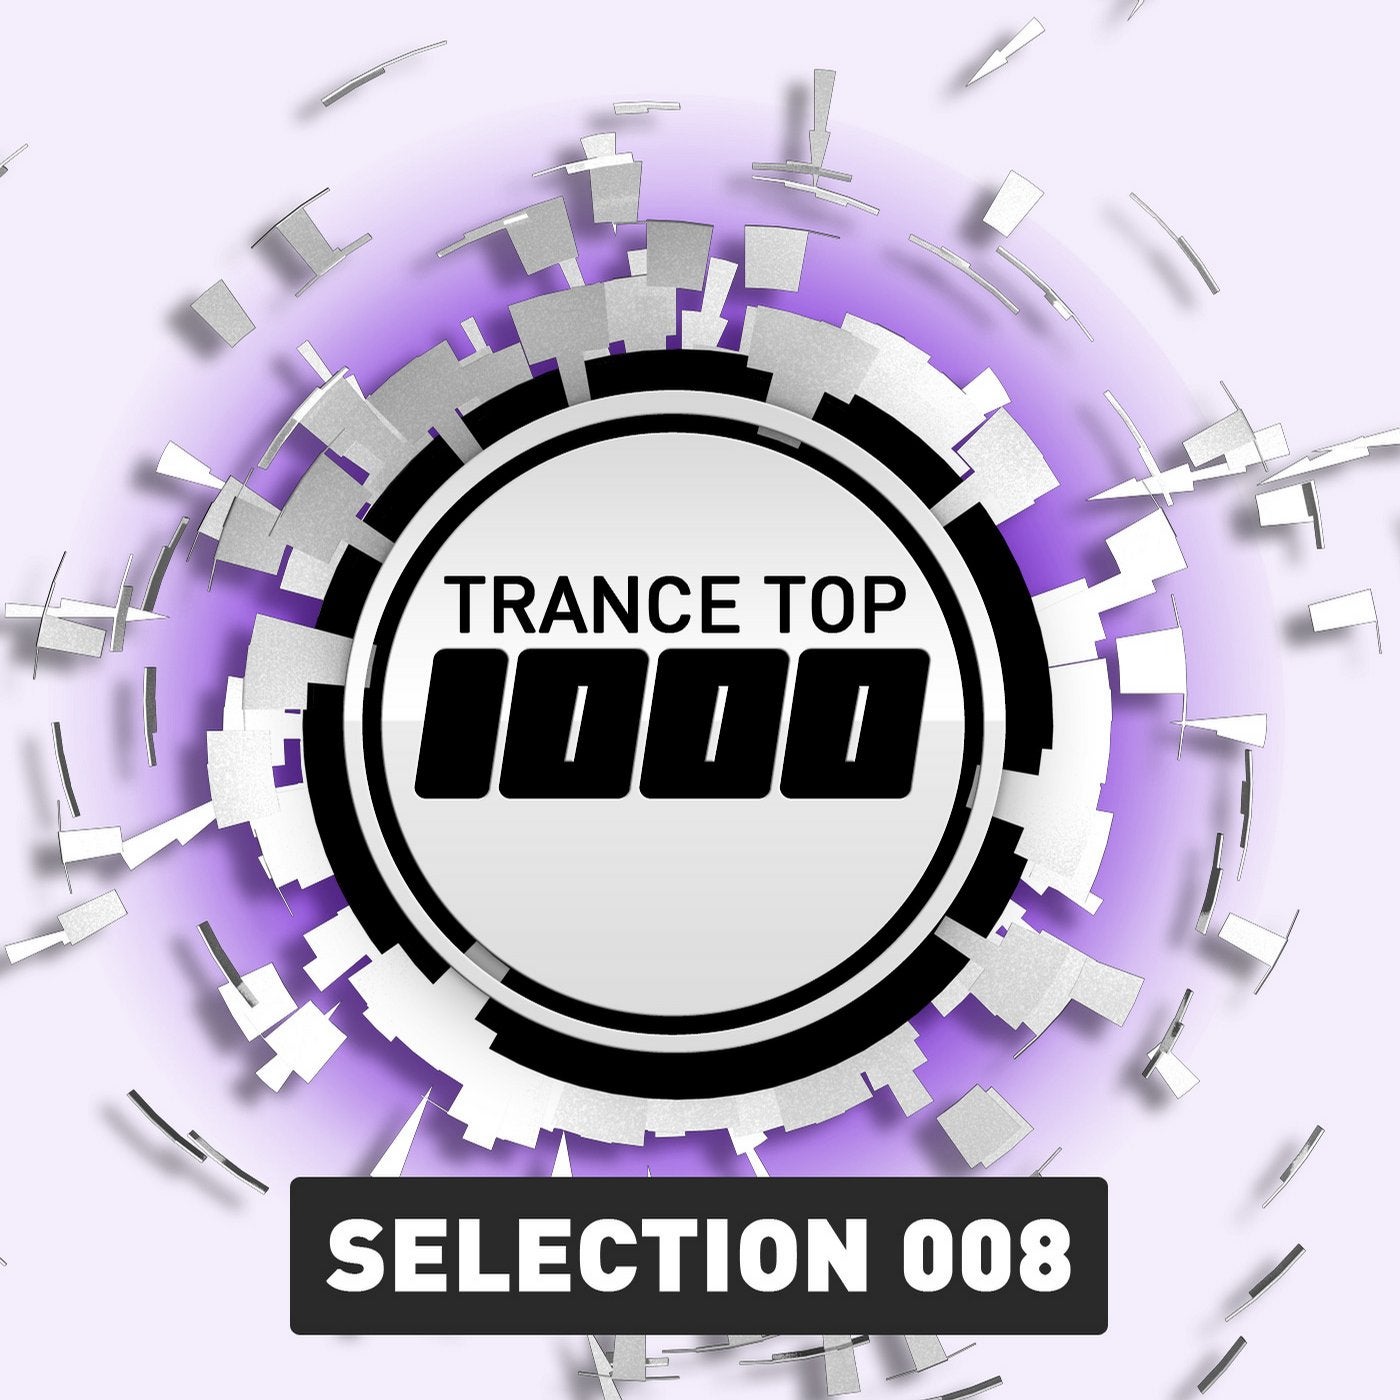 Trance Top 1000 Selection, Vol. 8 - Extended Versions